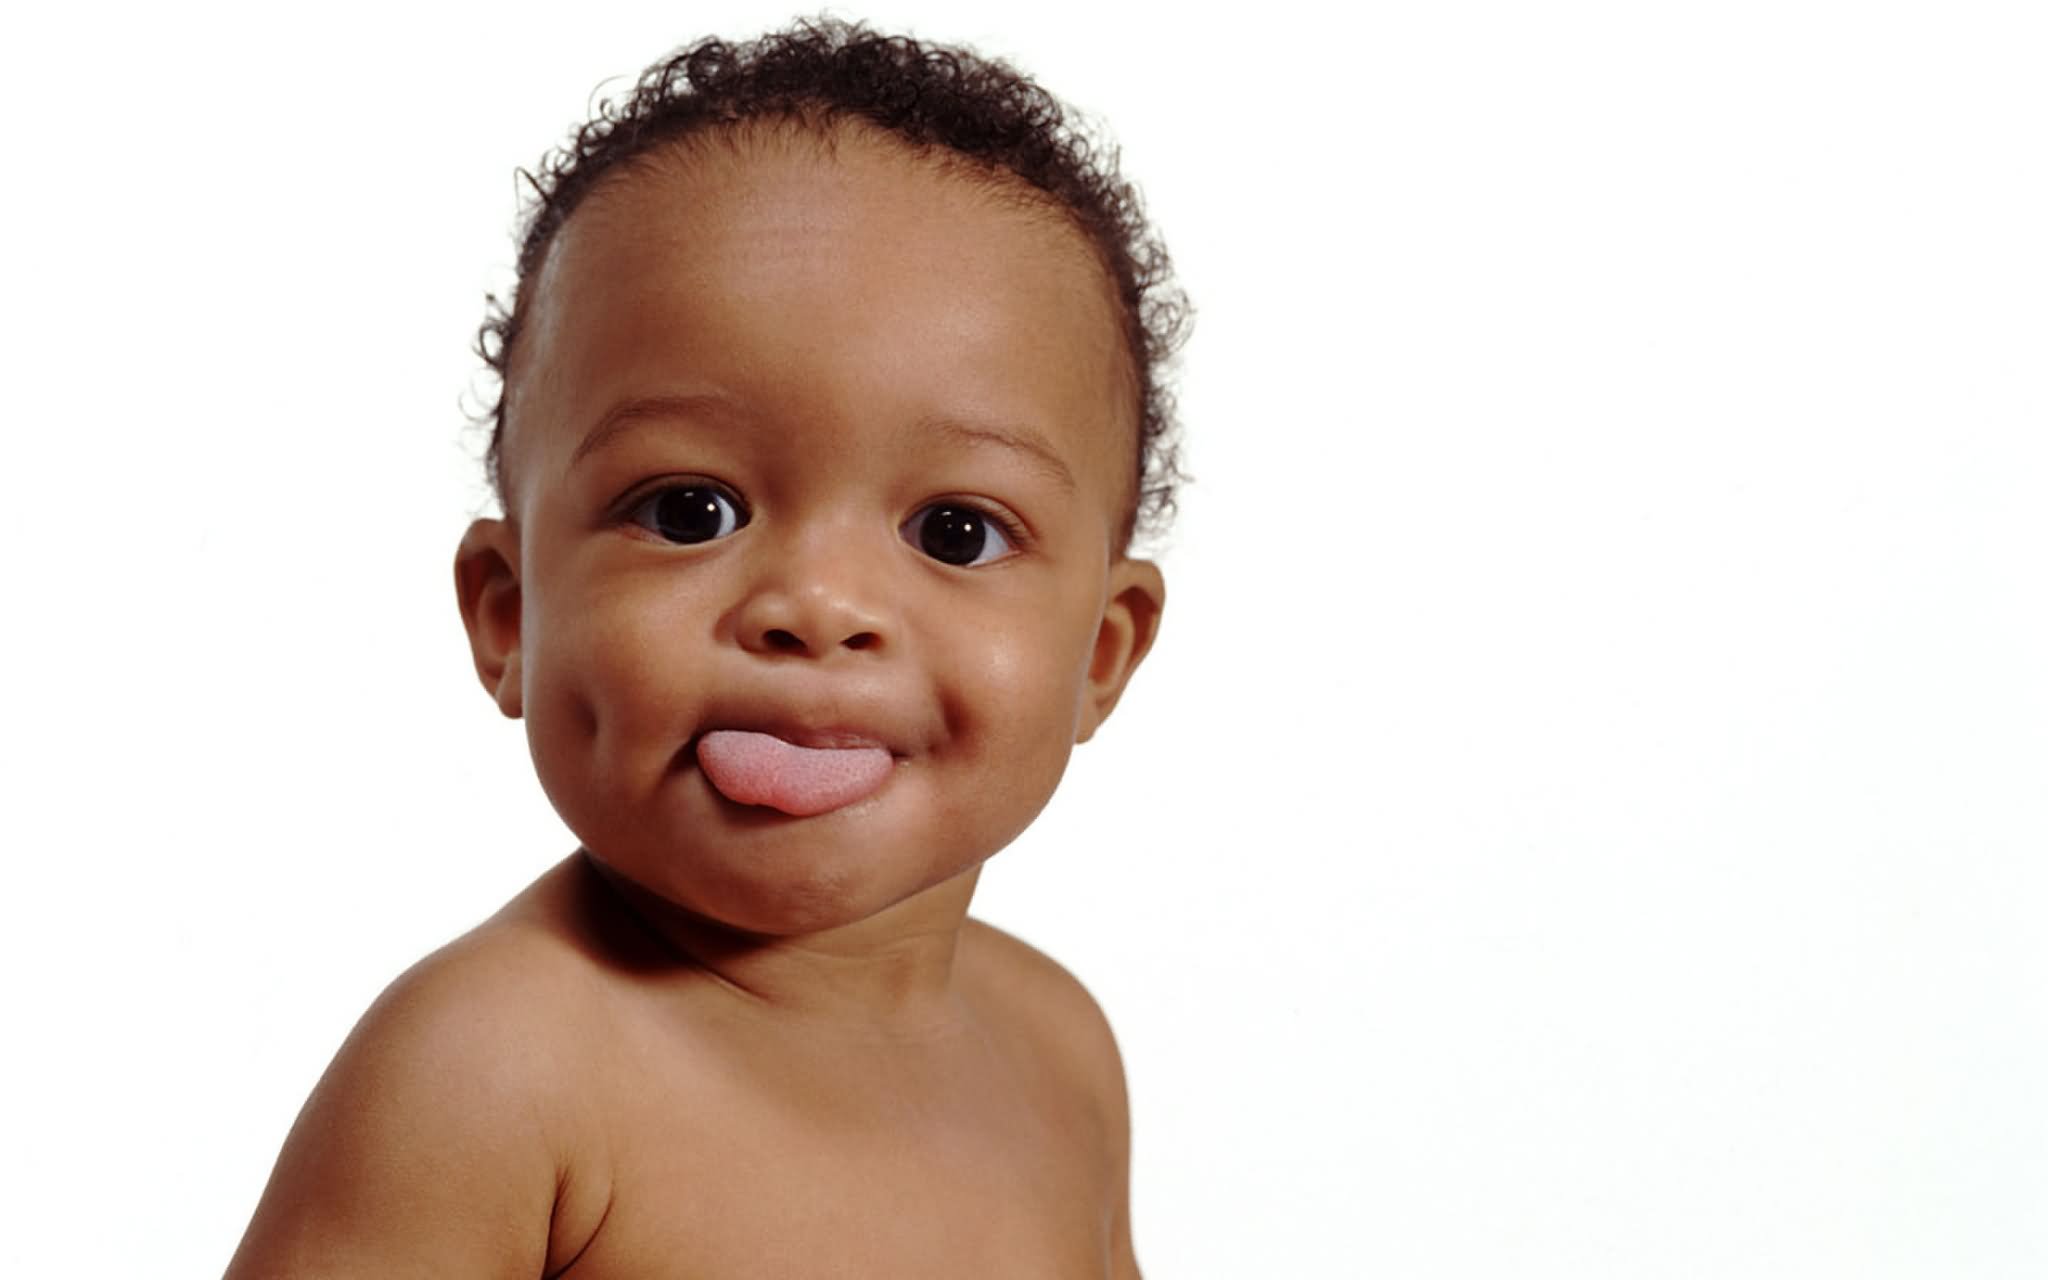 Funny-Tongue-Showing-Black-Baby-Picture.jpg